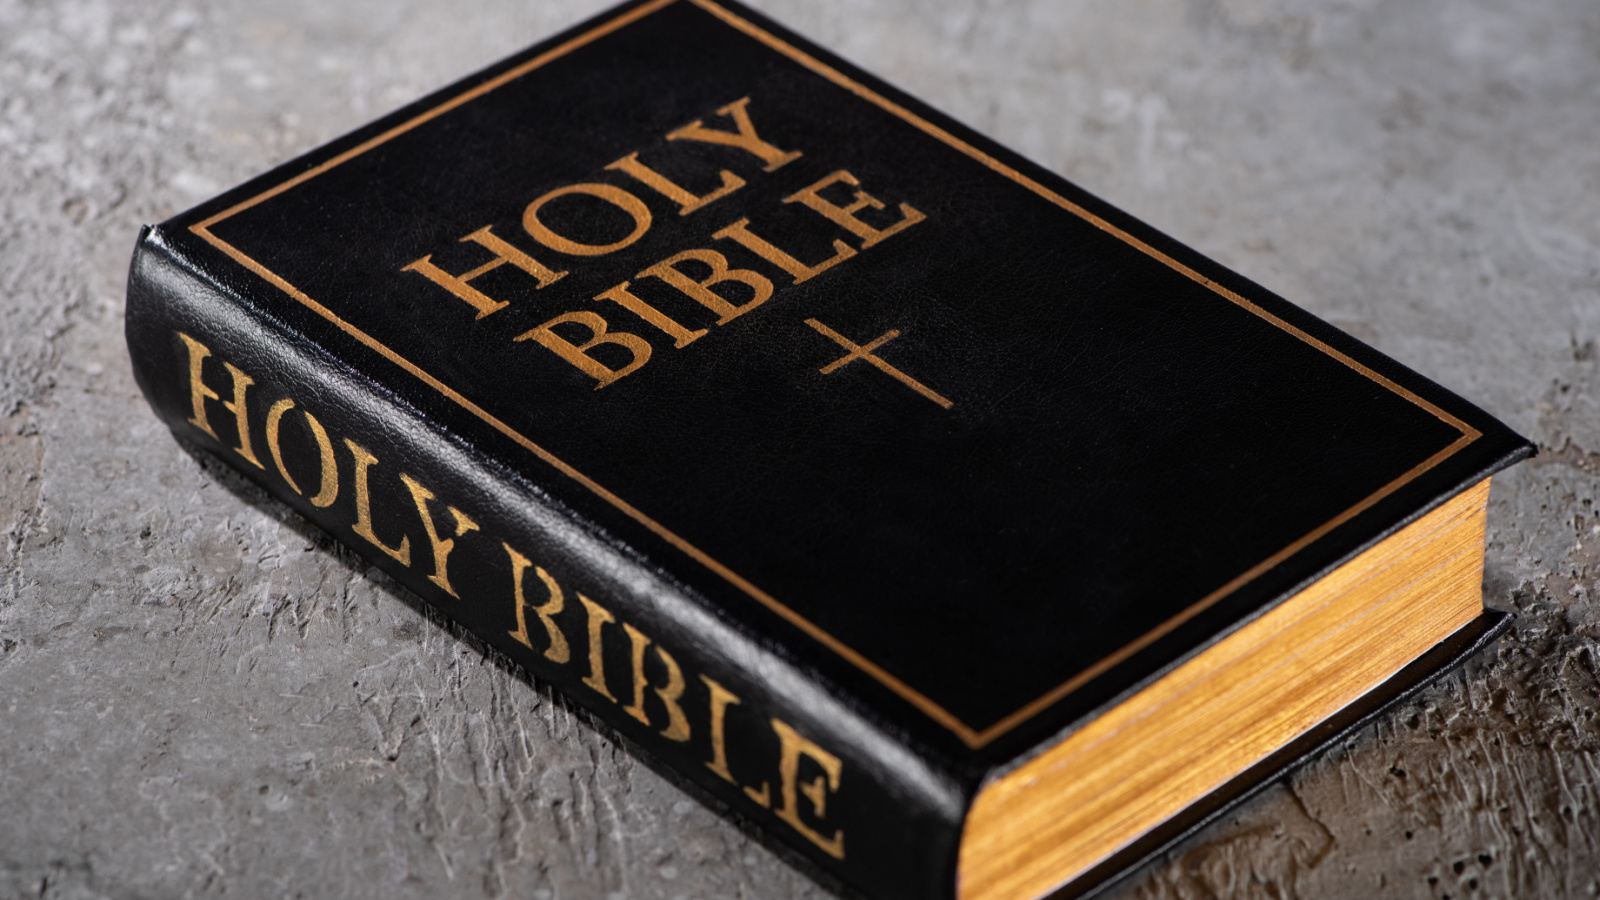 You Won’t Believe These: Most Misquoted Bible Verses